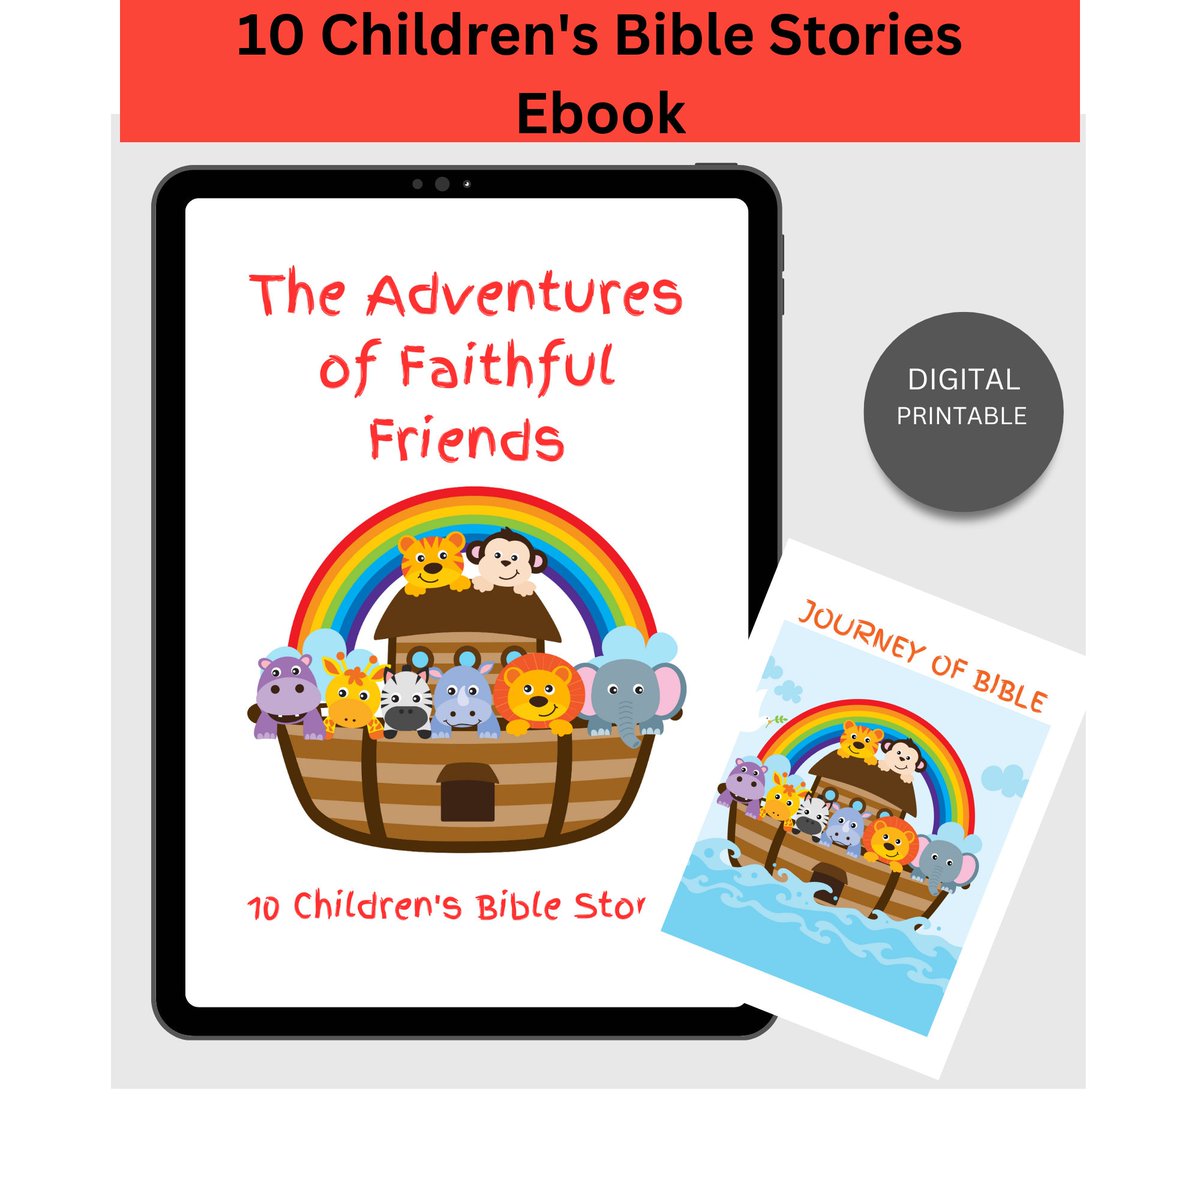 JUST UPLOADED #etsy shop: The Adventures of Faithful Friends 10 Bible Stories E-book teaching Children faith, courage, and stories of the bible #Christianparents etsy.me/41tG0ZK #childrensebook #biblicalstories #childrensbible #childrensread